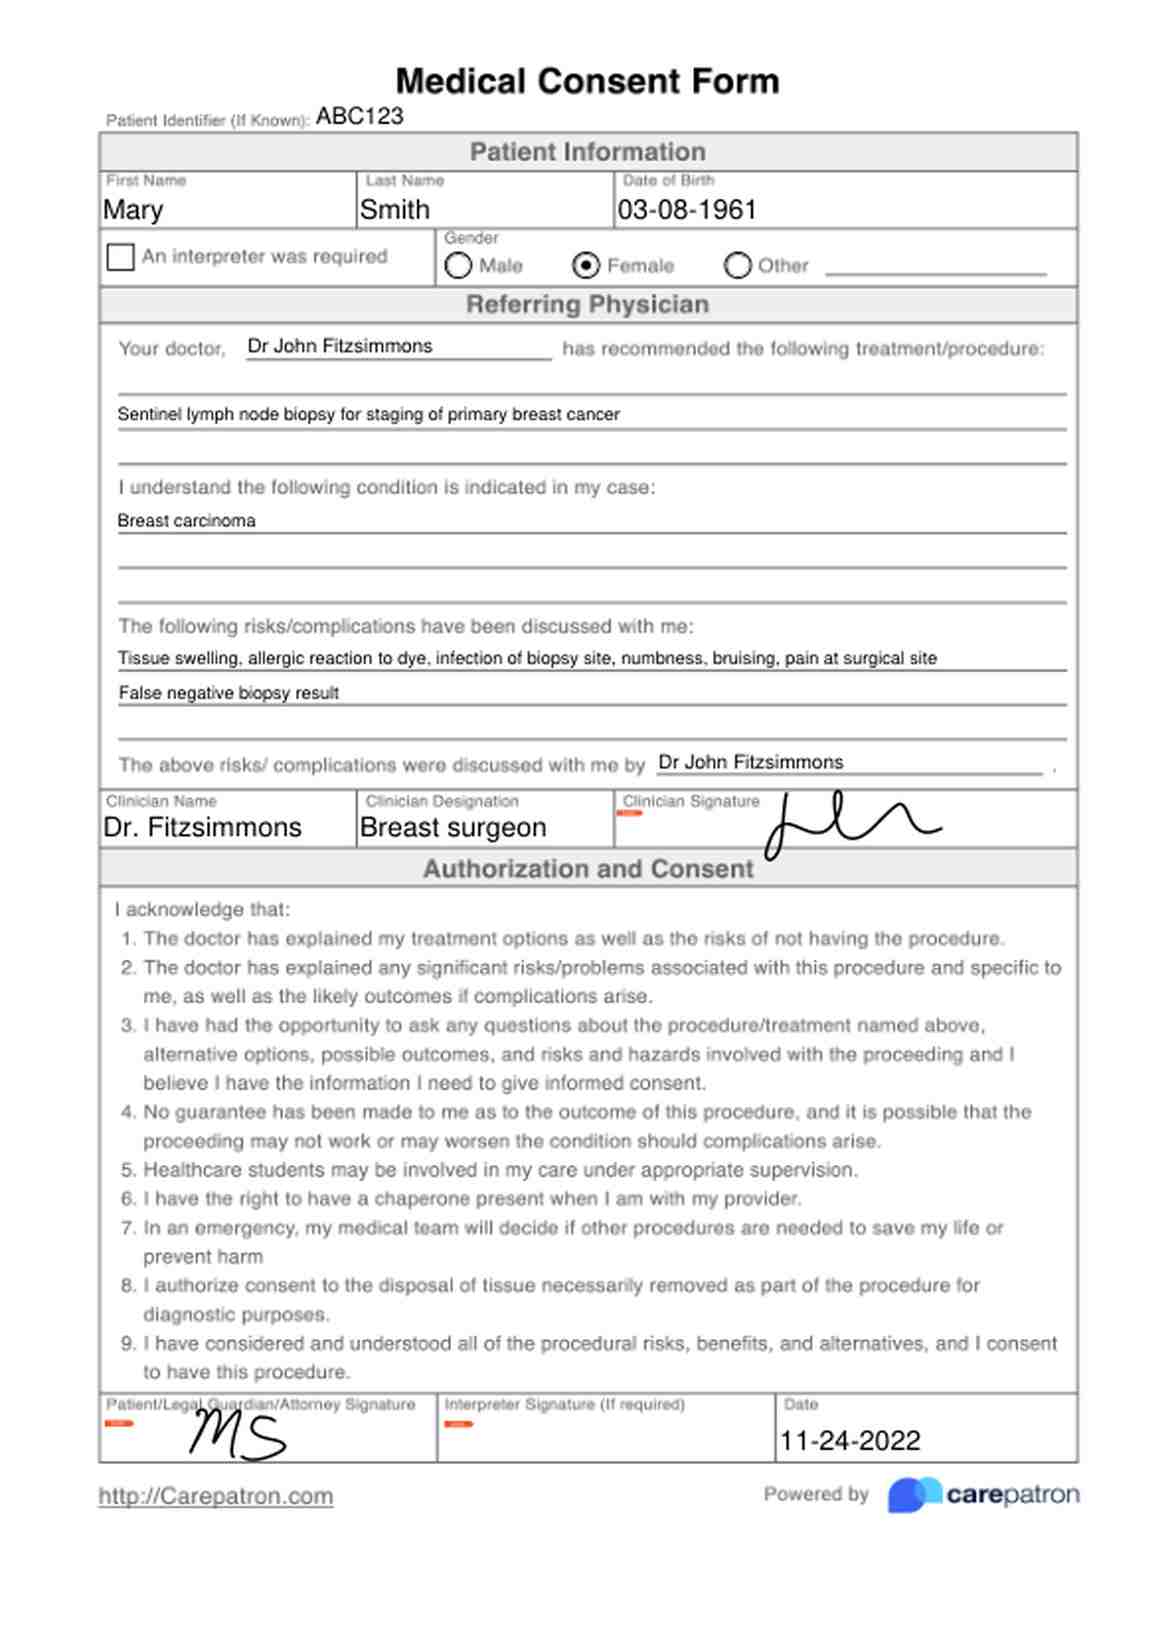 Medical Consent Form Template PDF Example